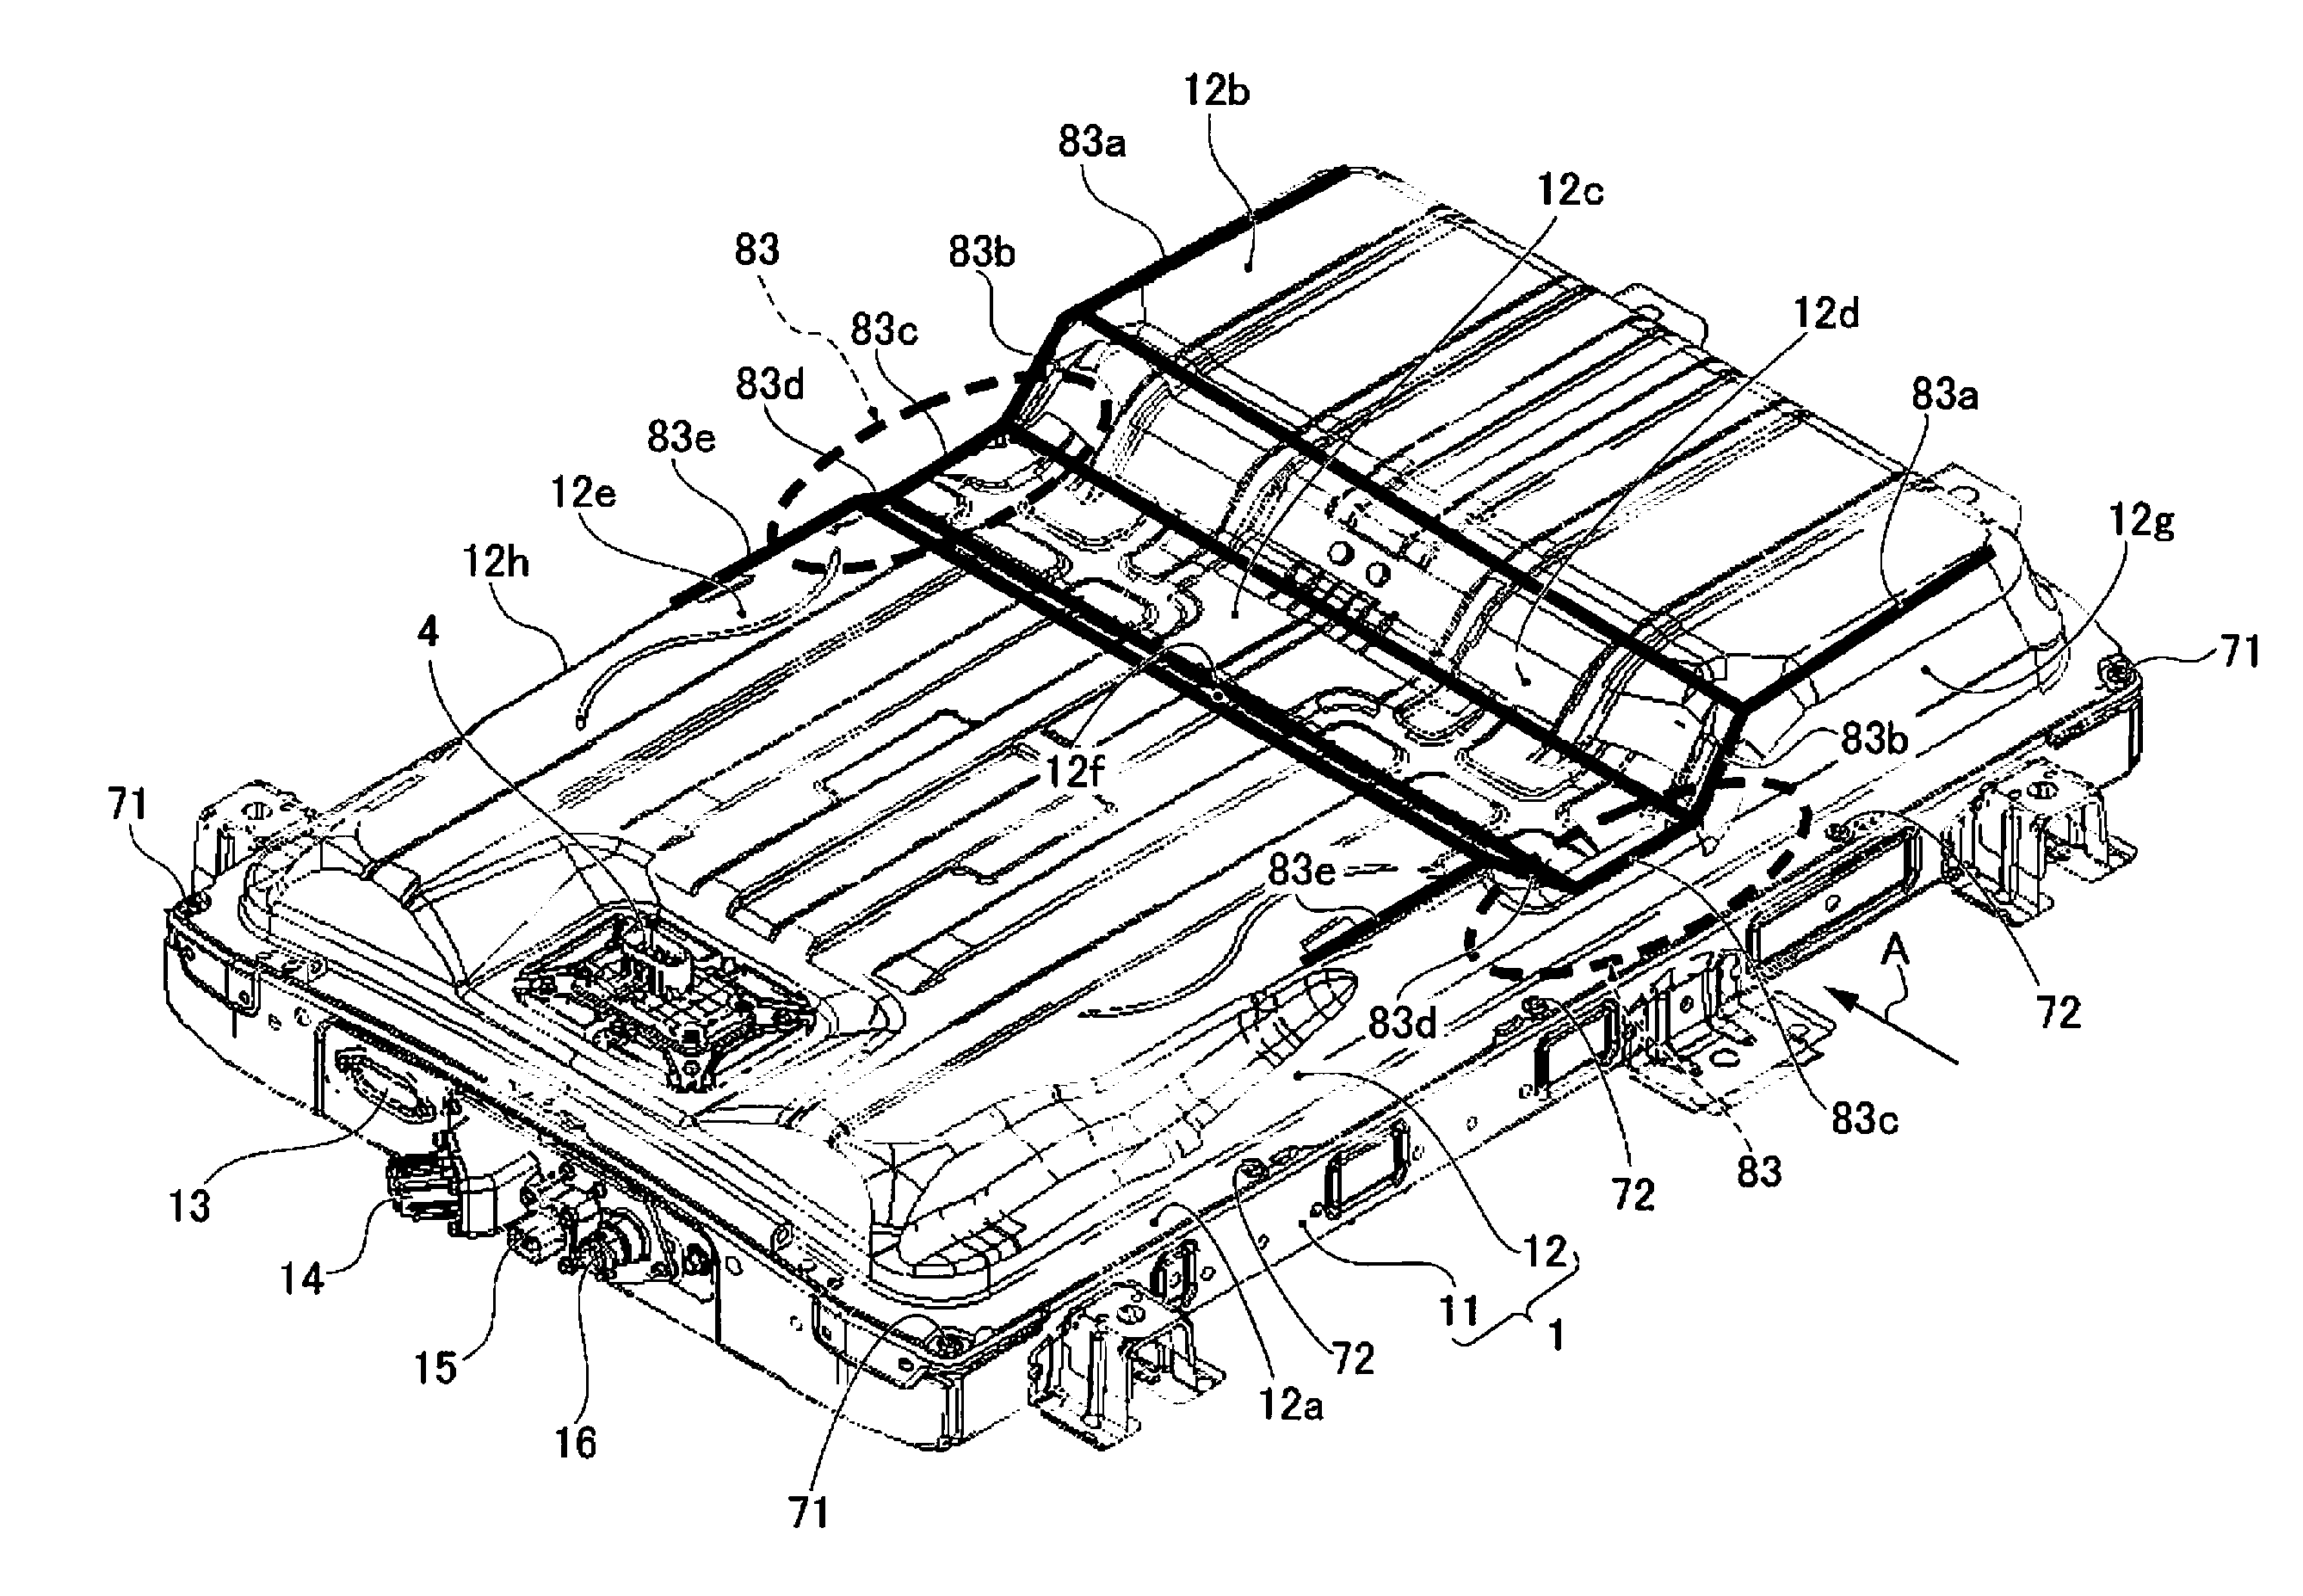 Vehicle installed battery pack with pressure release structure